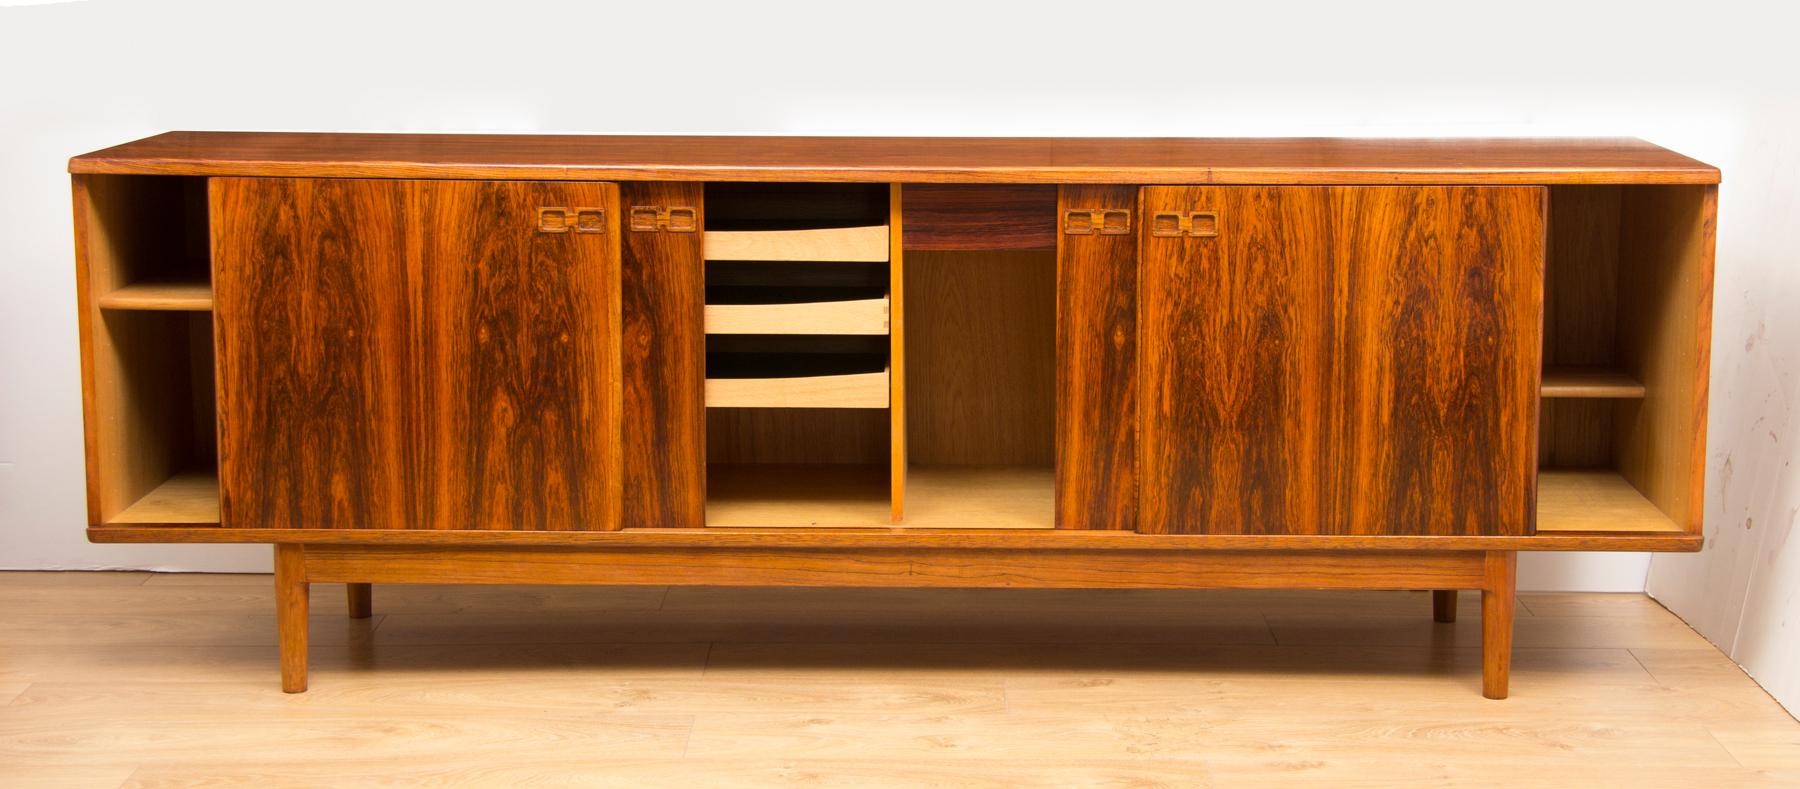 Christian Linneberg rosewood Danish sideboard, circa 1960 with four sliding doors featuring finger pull handles revealing fitted interior.